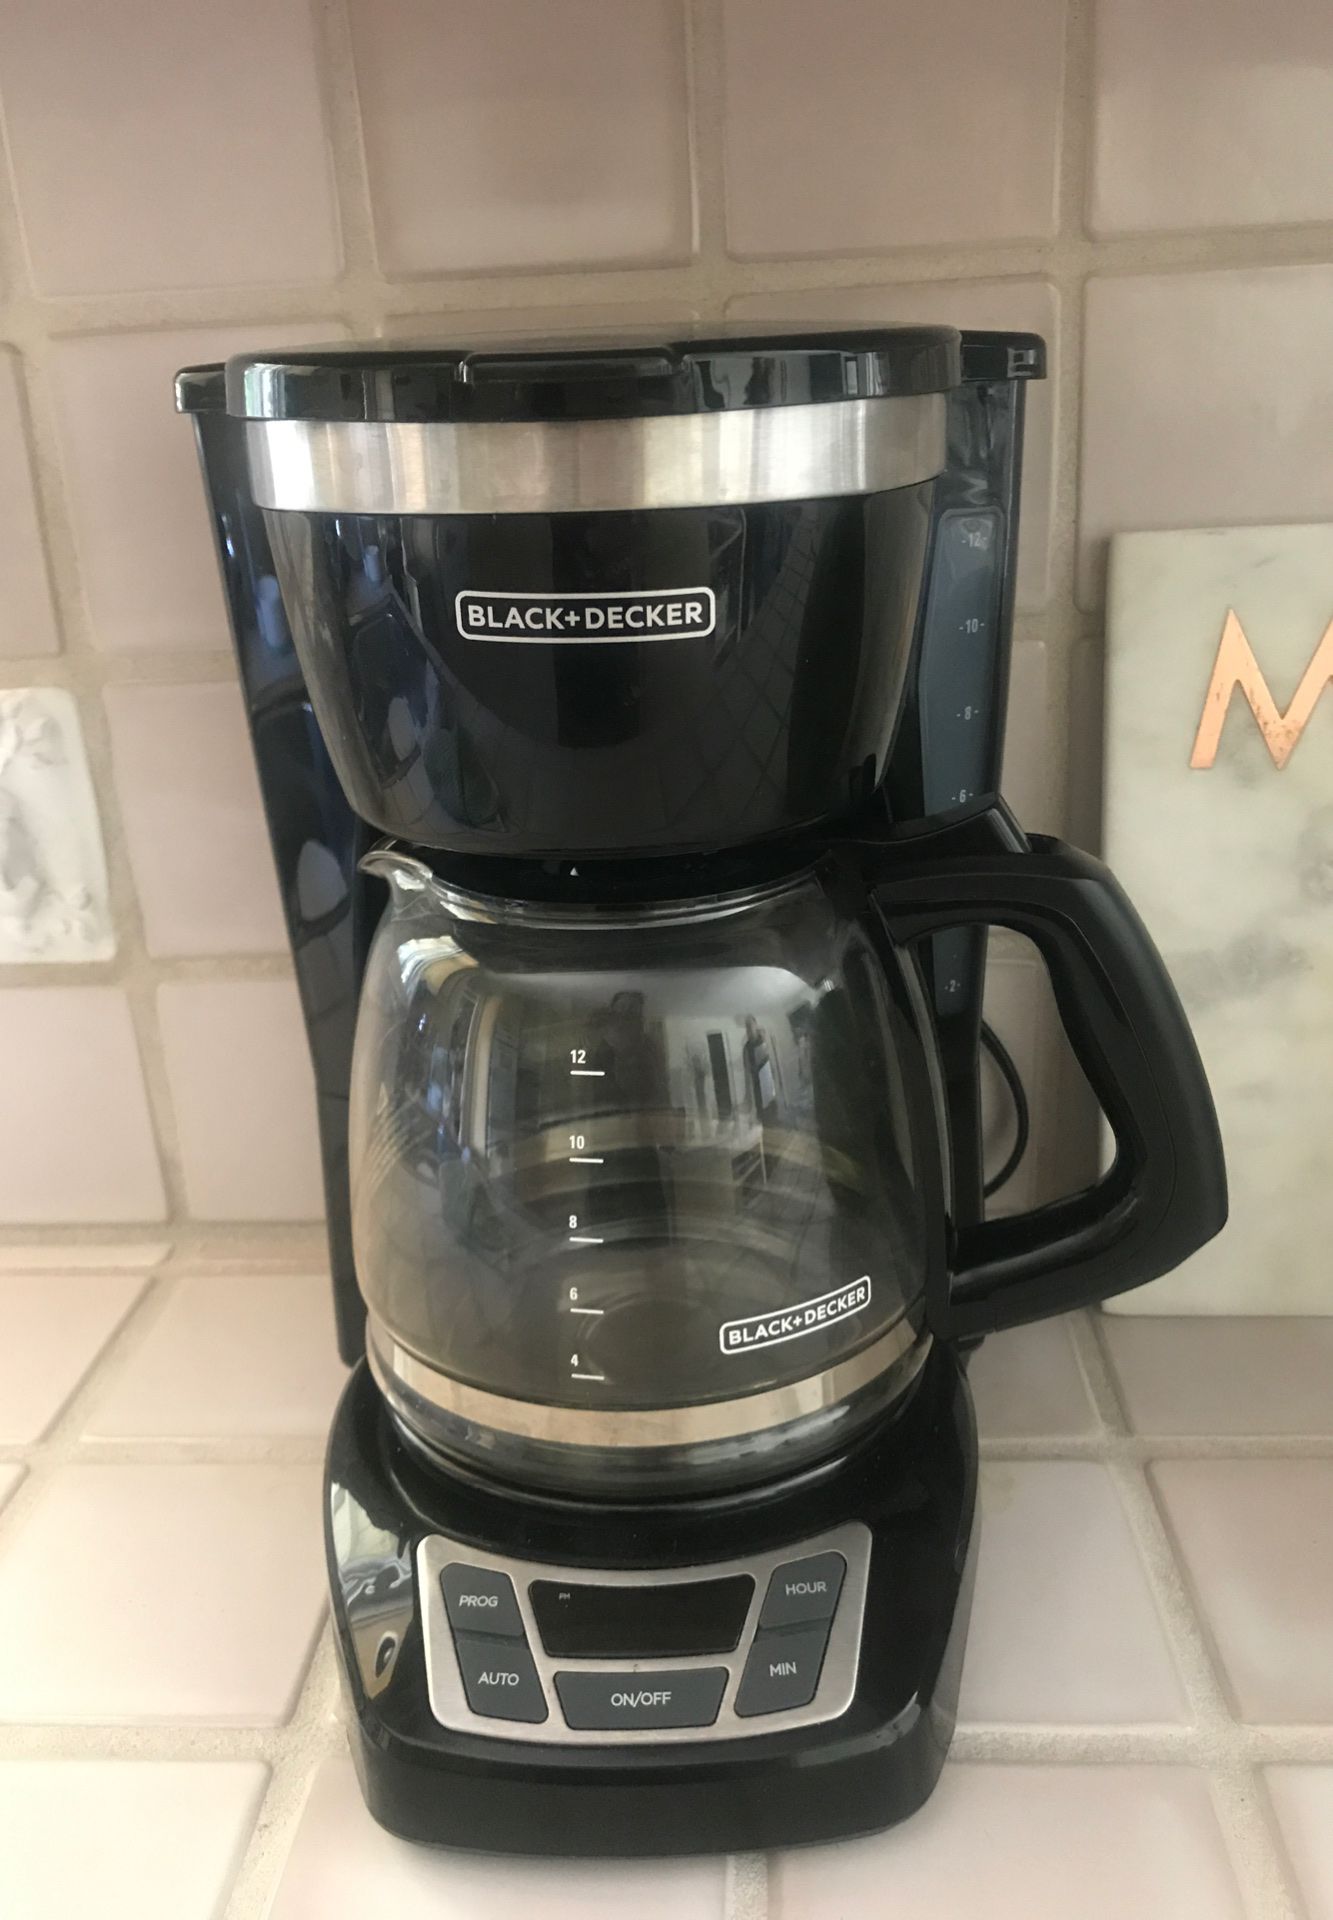 Black and Decker 12 cup coffee maker